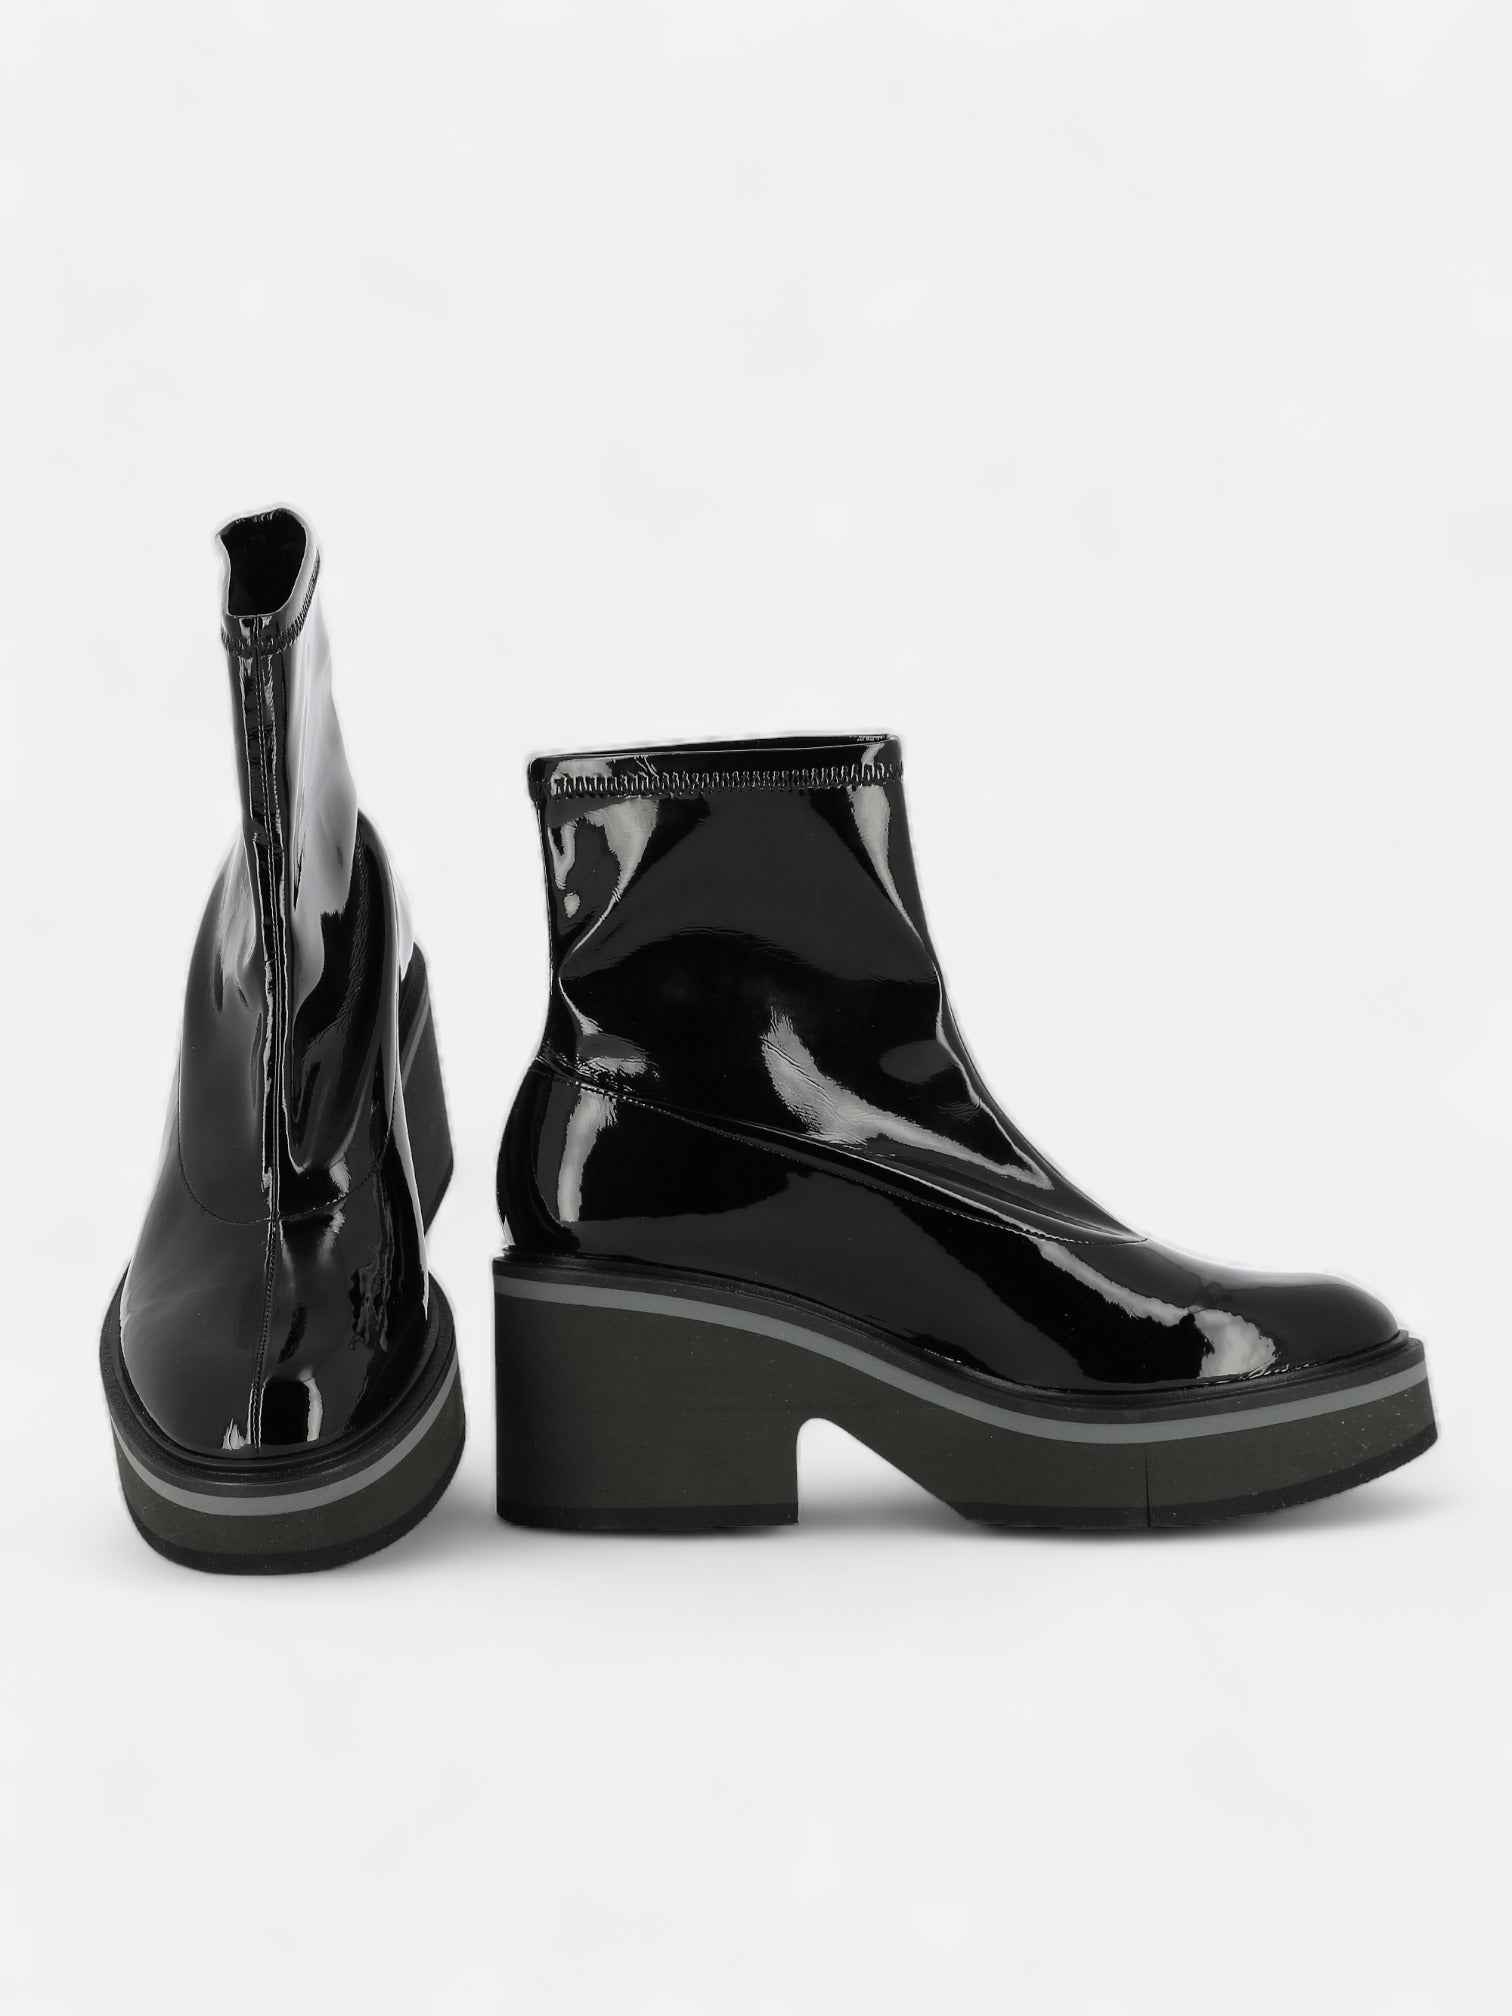 ANKLE BOOTS - ALBANE ankle boots, stretch fabric black - 3606063852517 - Clergerie Paris - Europe